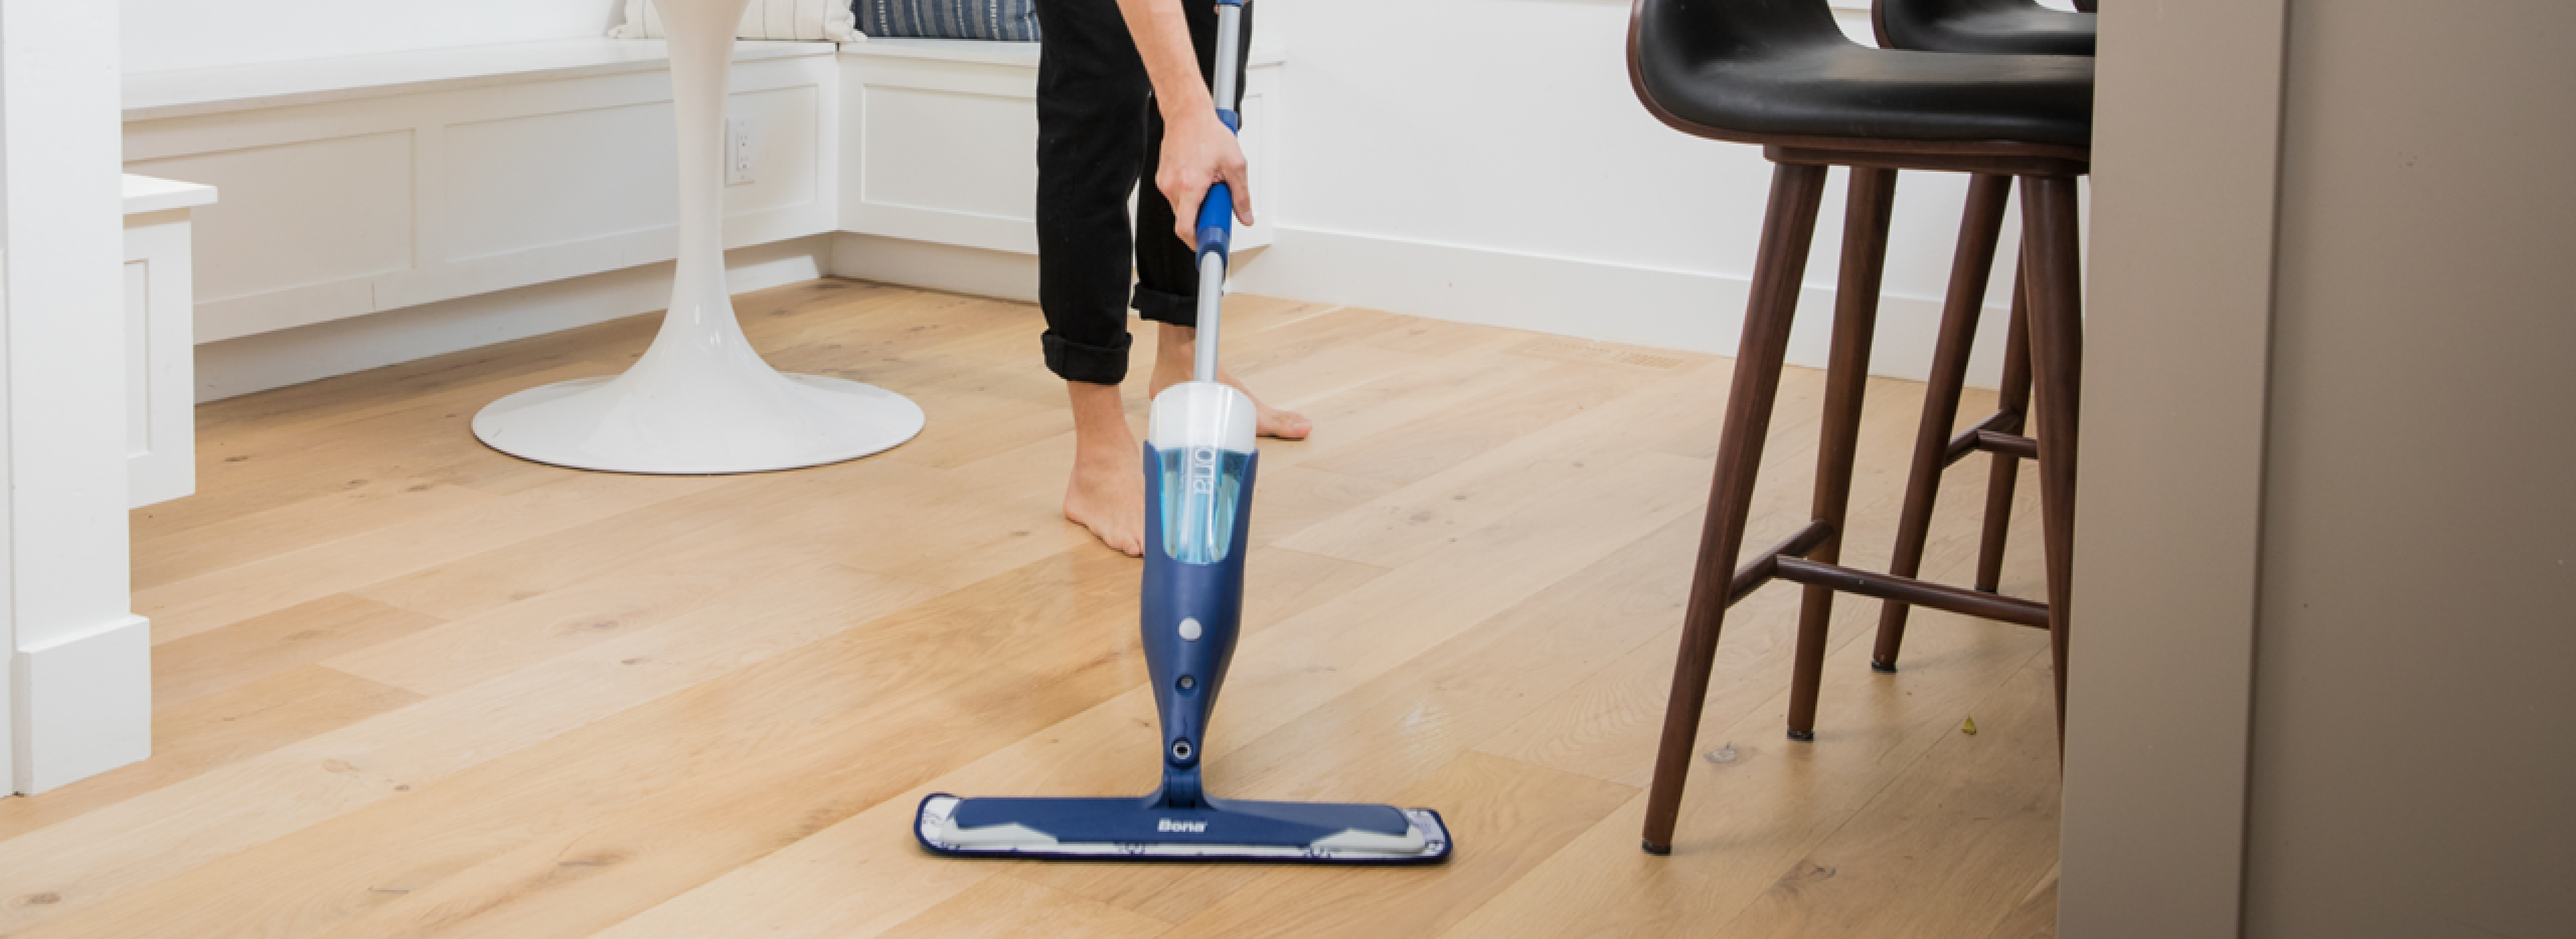 How to Mop Floors, Including Tile, Hardwood, Laminate, and More